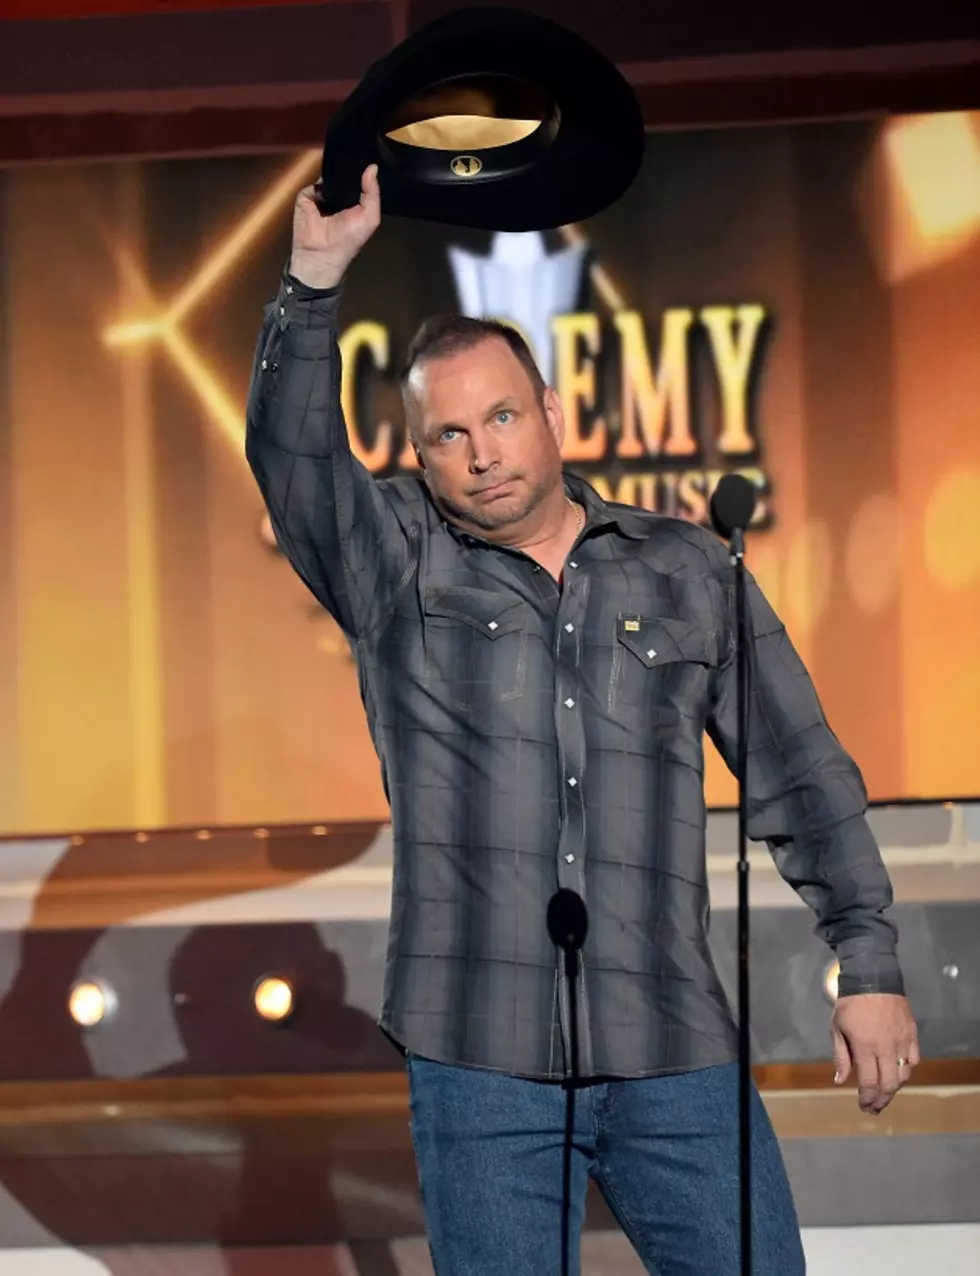 Garth Brooks Is Doing HOW MANY Chicago Shows?